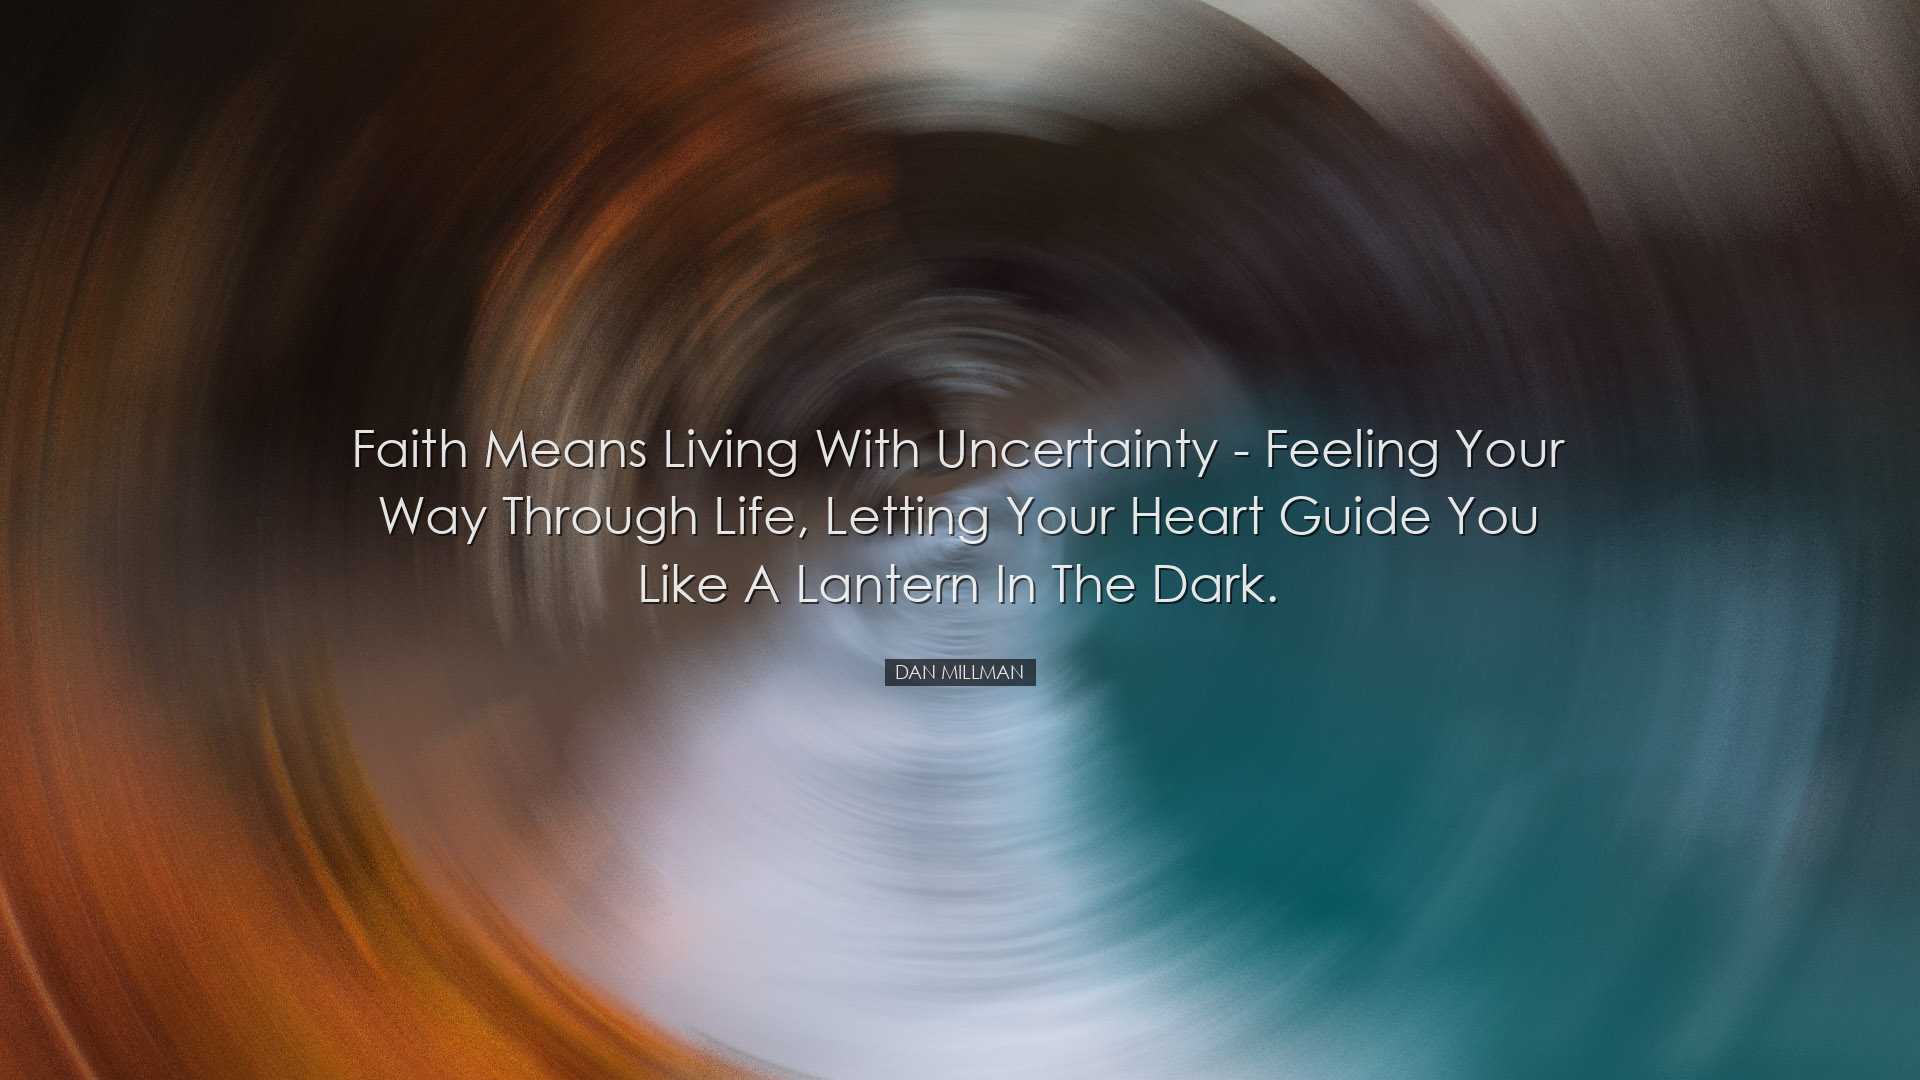 Faith means living with uncertainty - feeling your way through lif